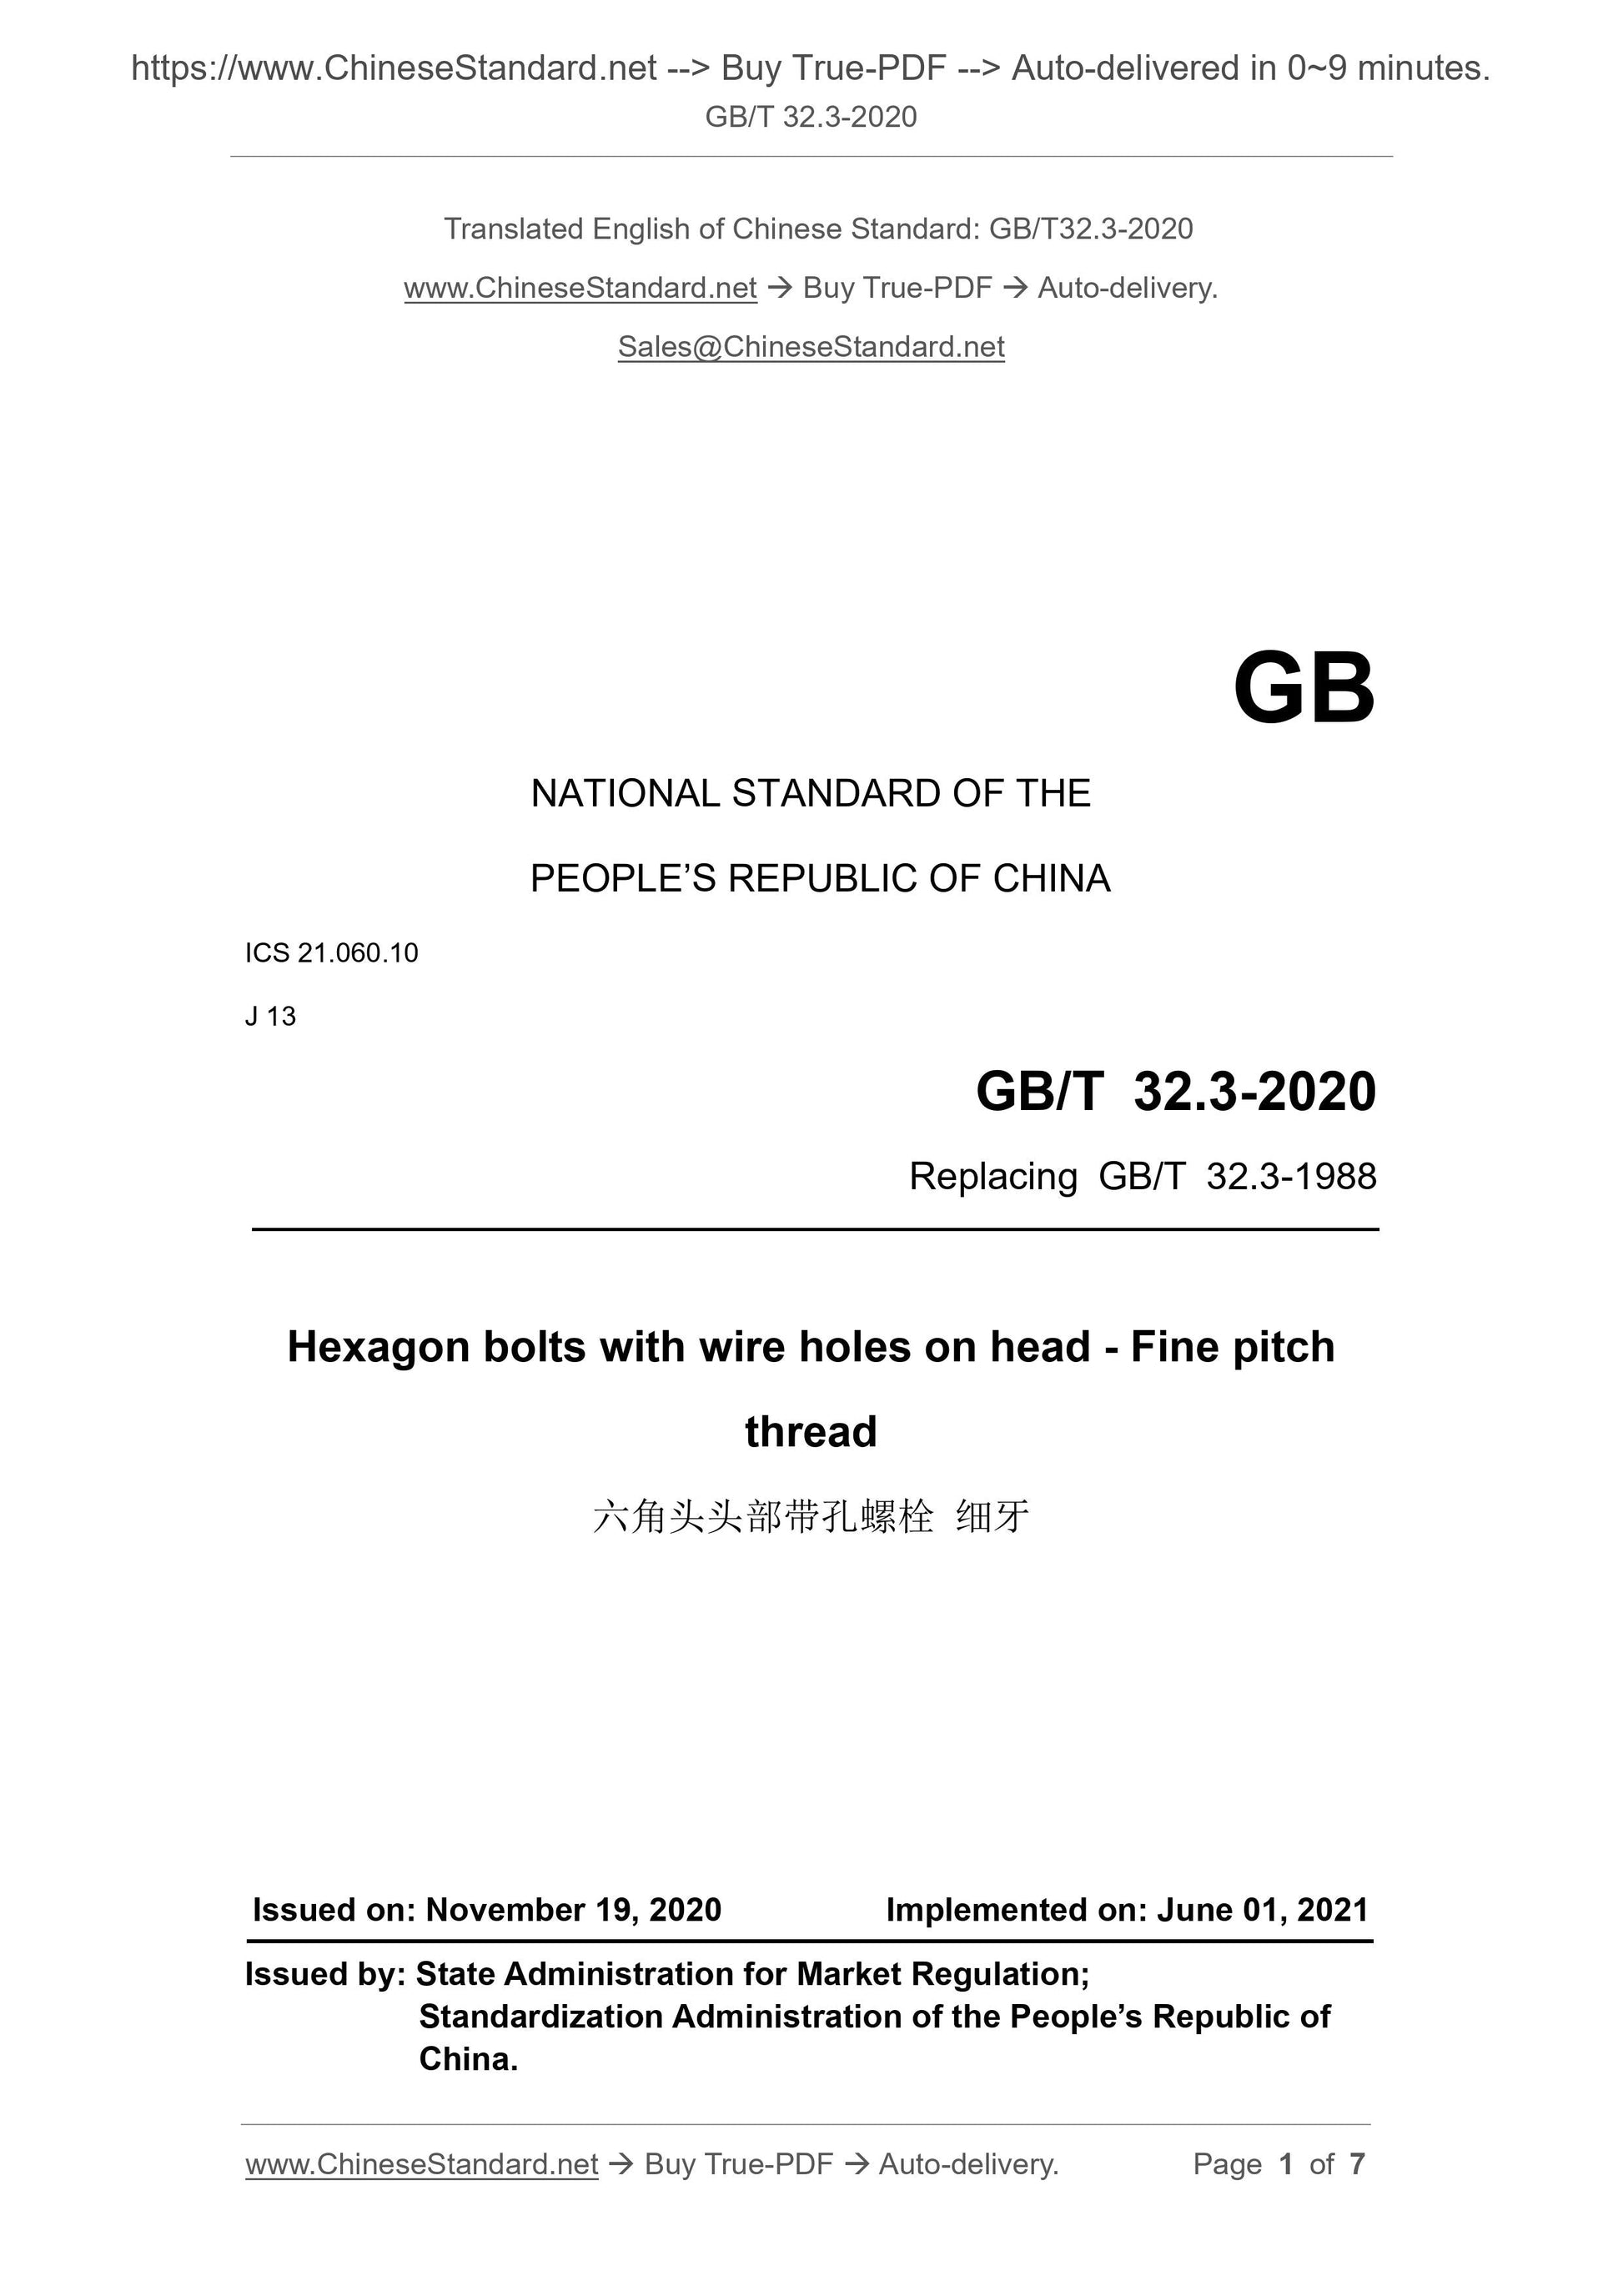 GB/T 32.3-2020 Page 1